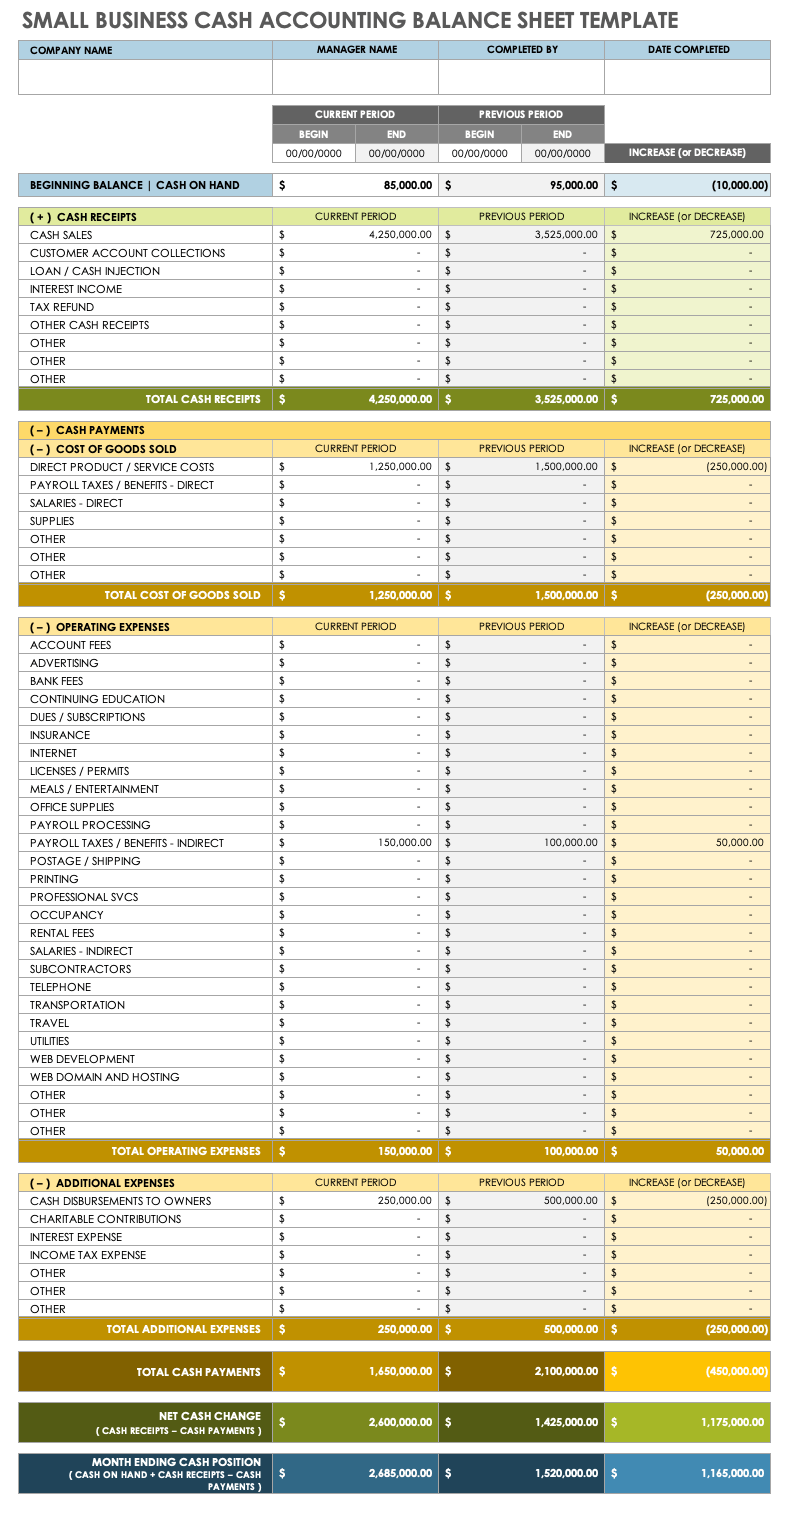 Small Business Cash Accounting Balance Sheets Template